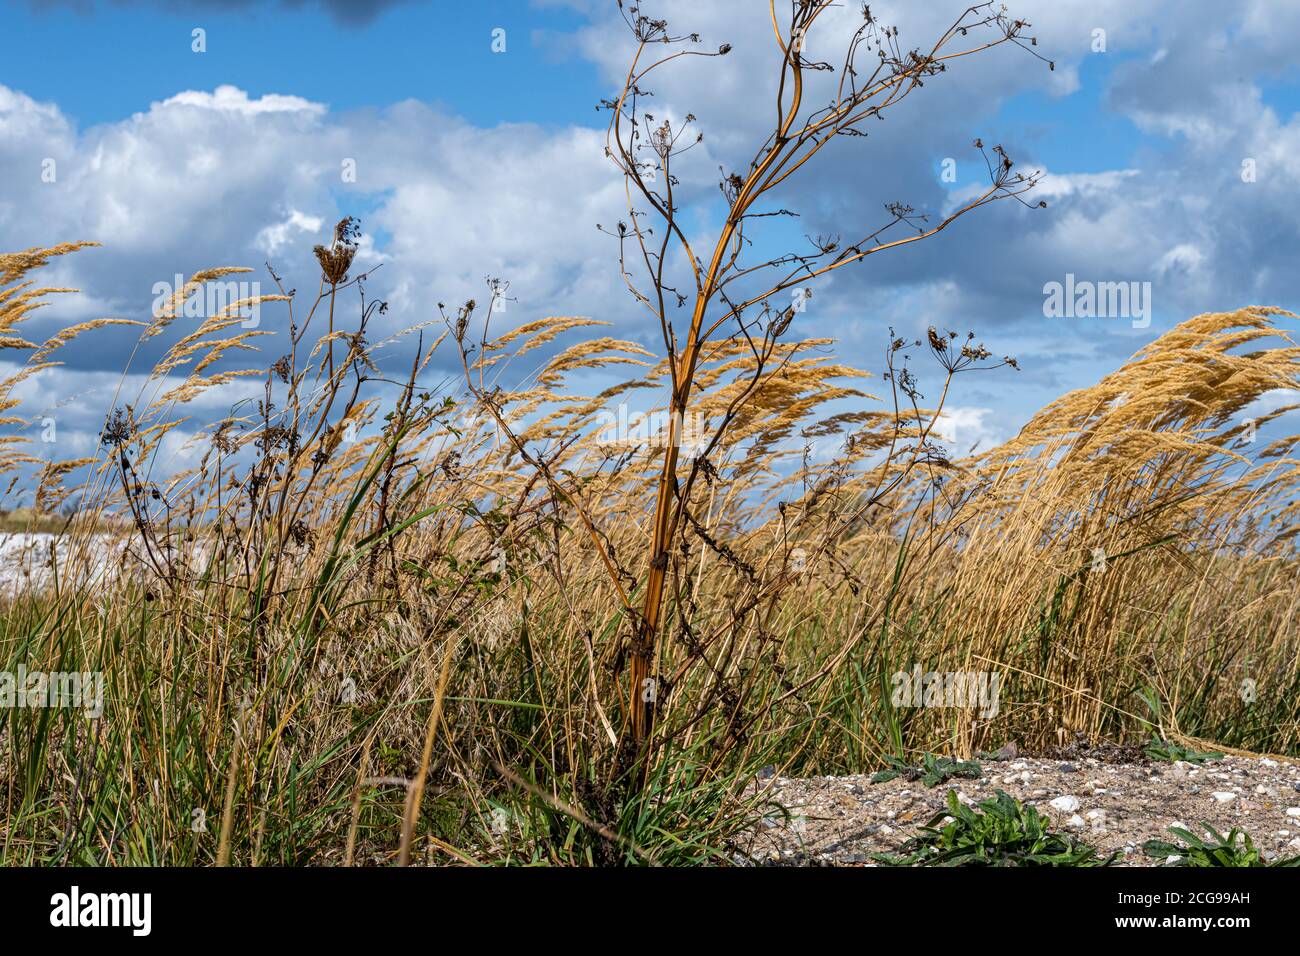 A photo of wild grass with a dramatic sky with dark clouds in the background Stock Photo